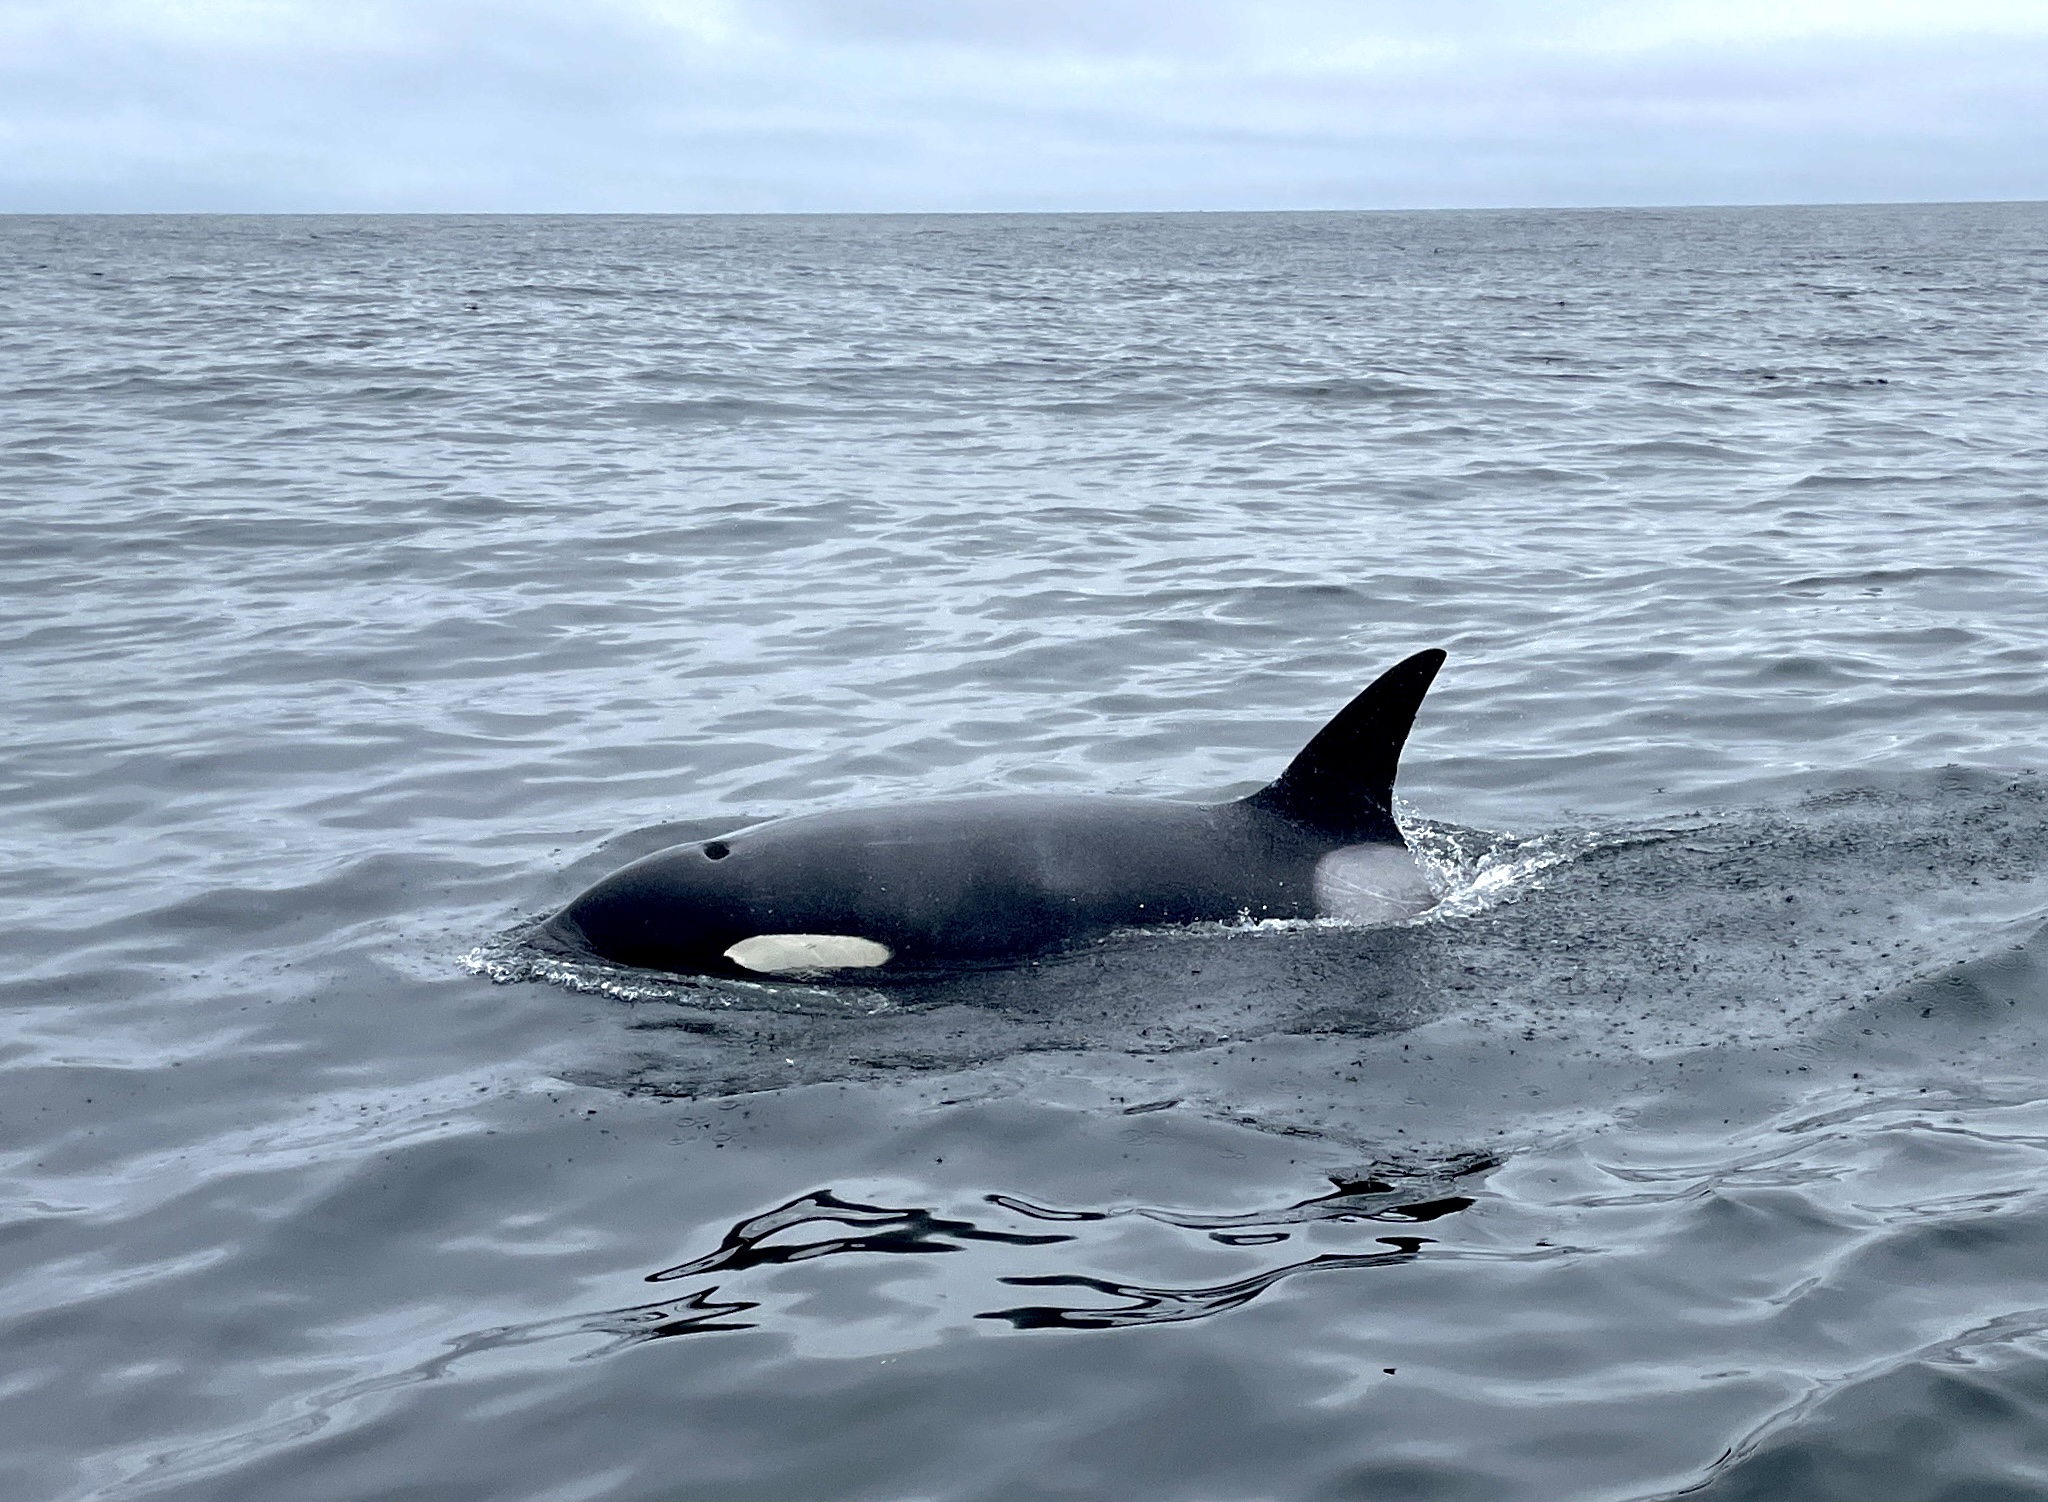 Orcas feeding on fresh kill off Point Arena were an exciting sight for the team.